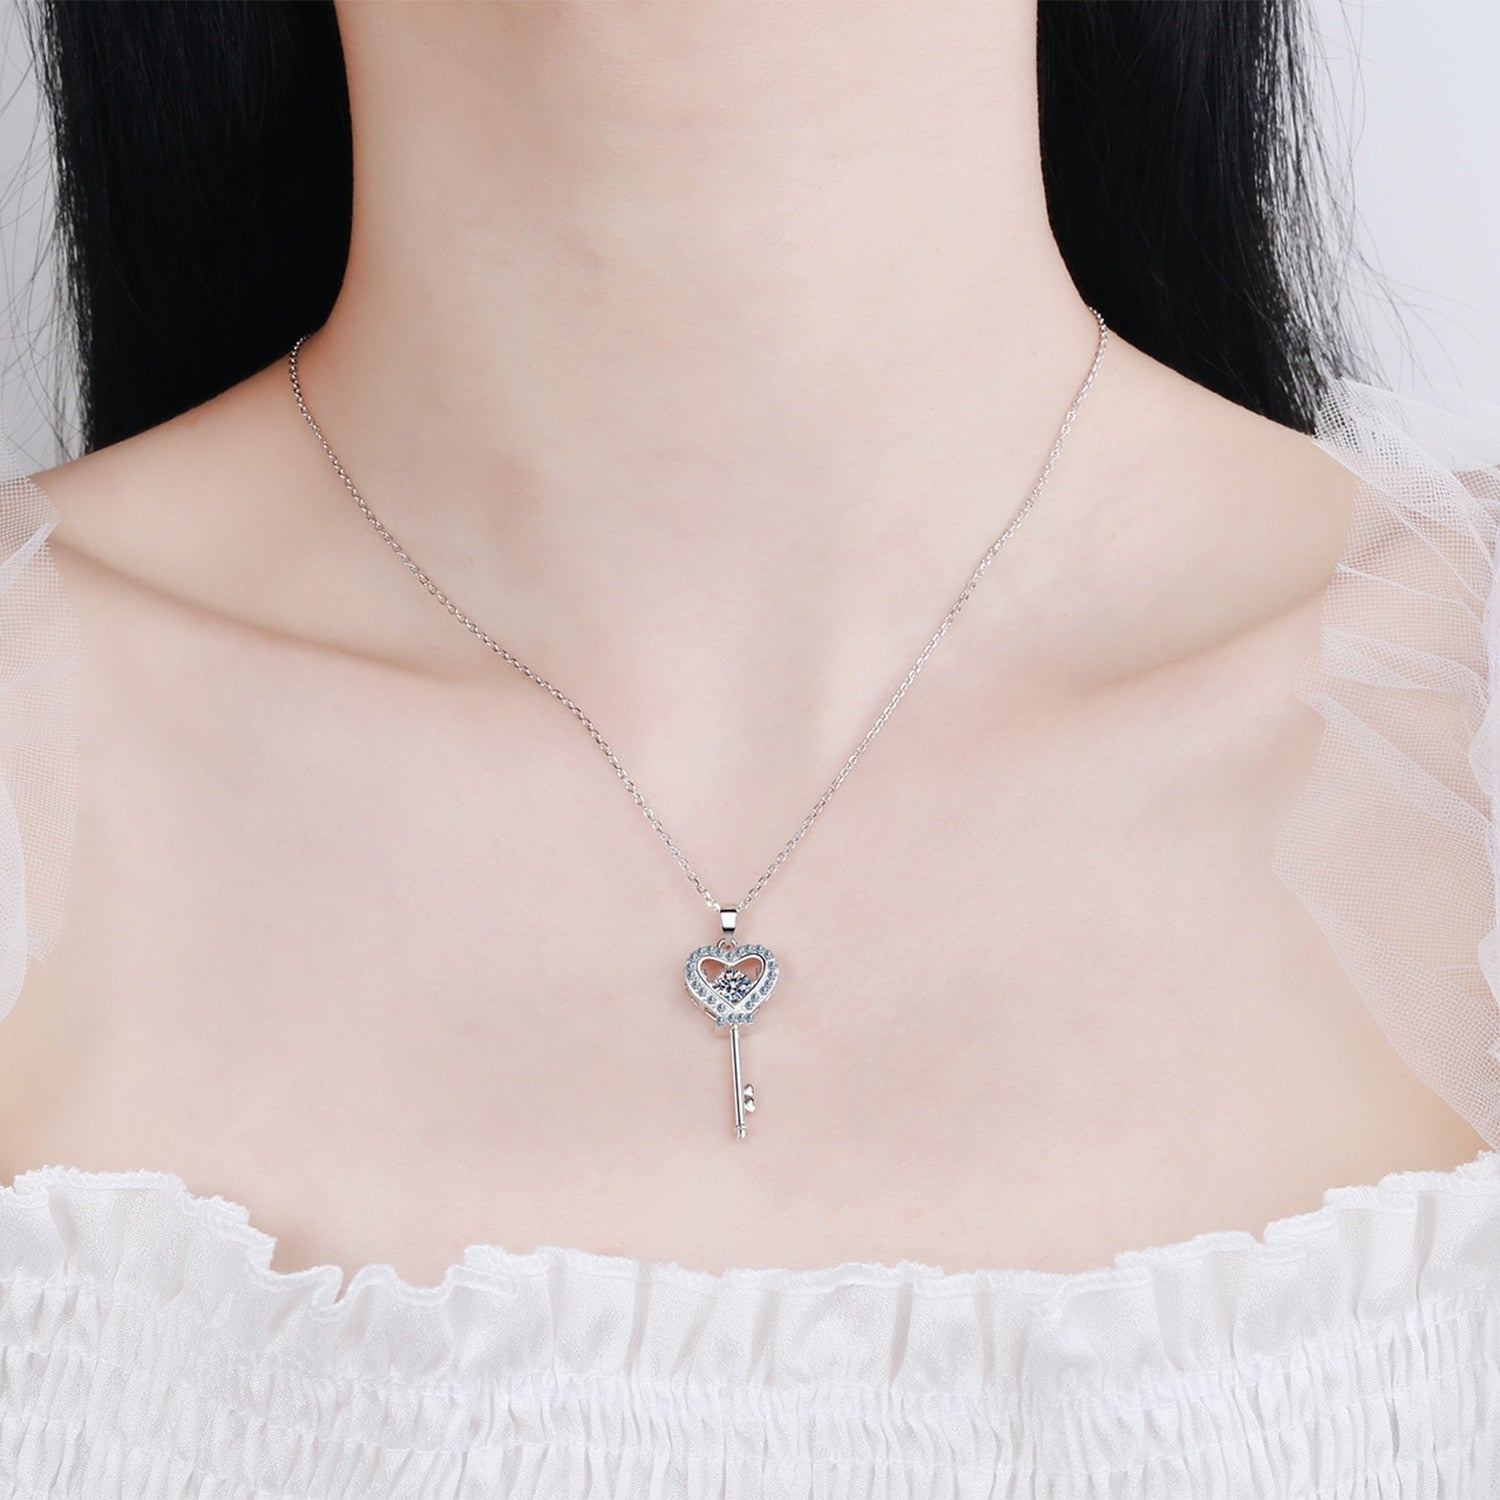 Key And Stone Pendant With A Moissanite Diamond on a woman